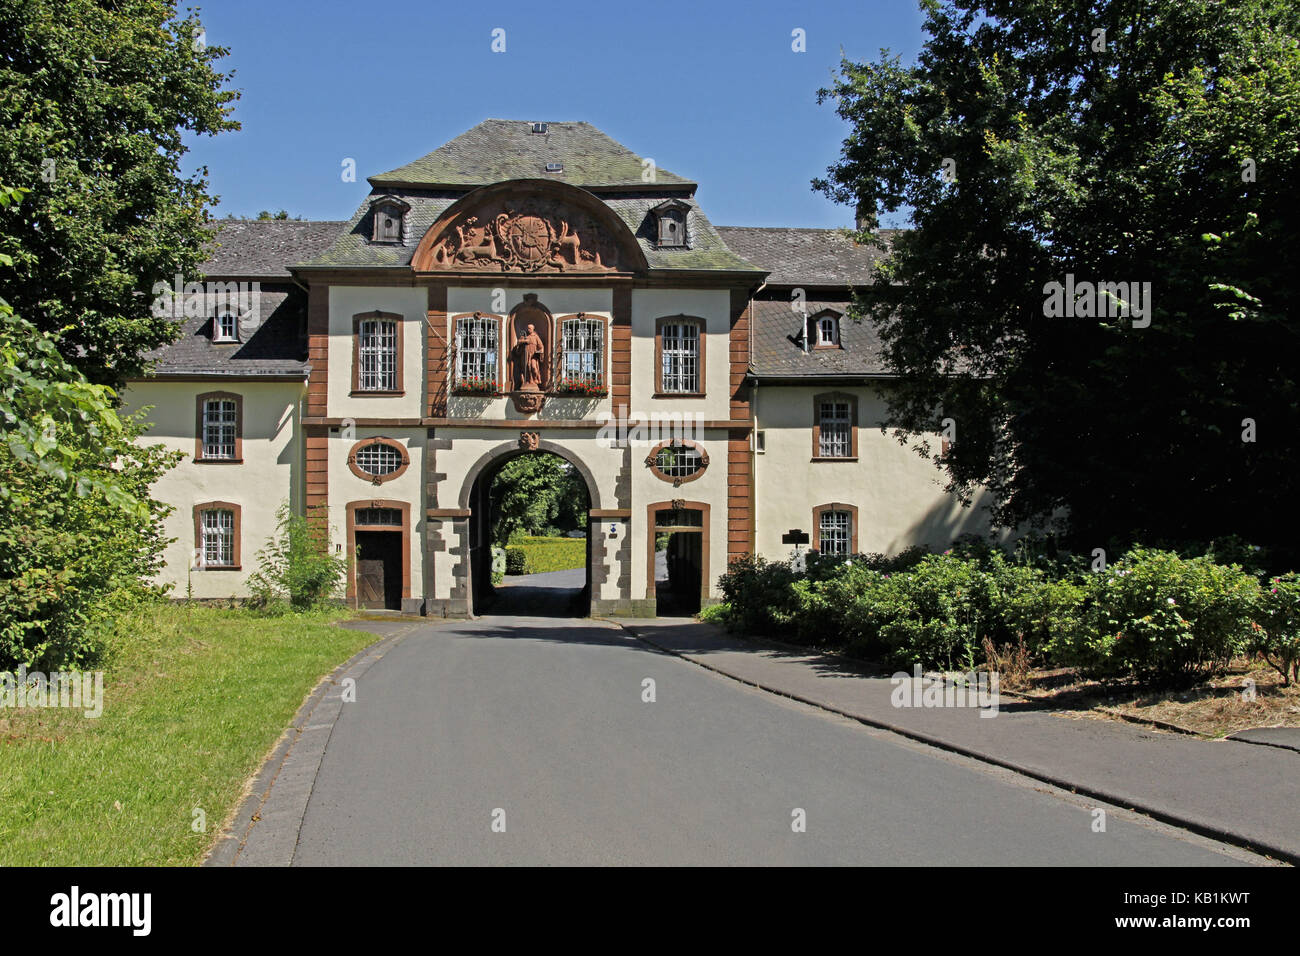 Germany, Hessia, Arnsberg near Lich, upper Hessians, Wetteraukreis, ruin of a former Benedictine abbey, baroque Pforthaus, established by father Cölestin Wagner, abbot coat of arms, statue of holy Bernhard von Clairvaux, access to the abbey courtyard, Stock Photo